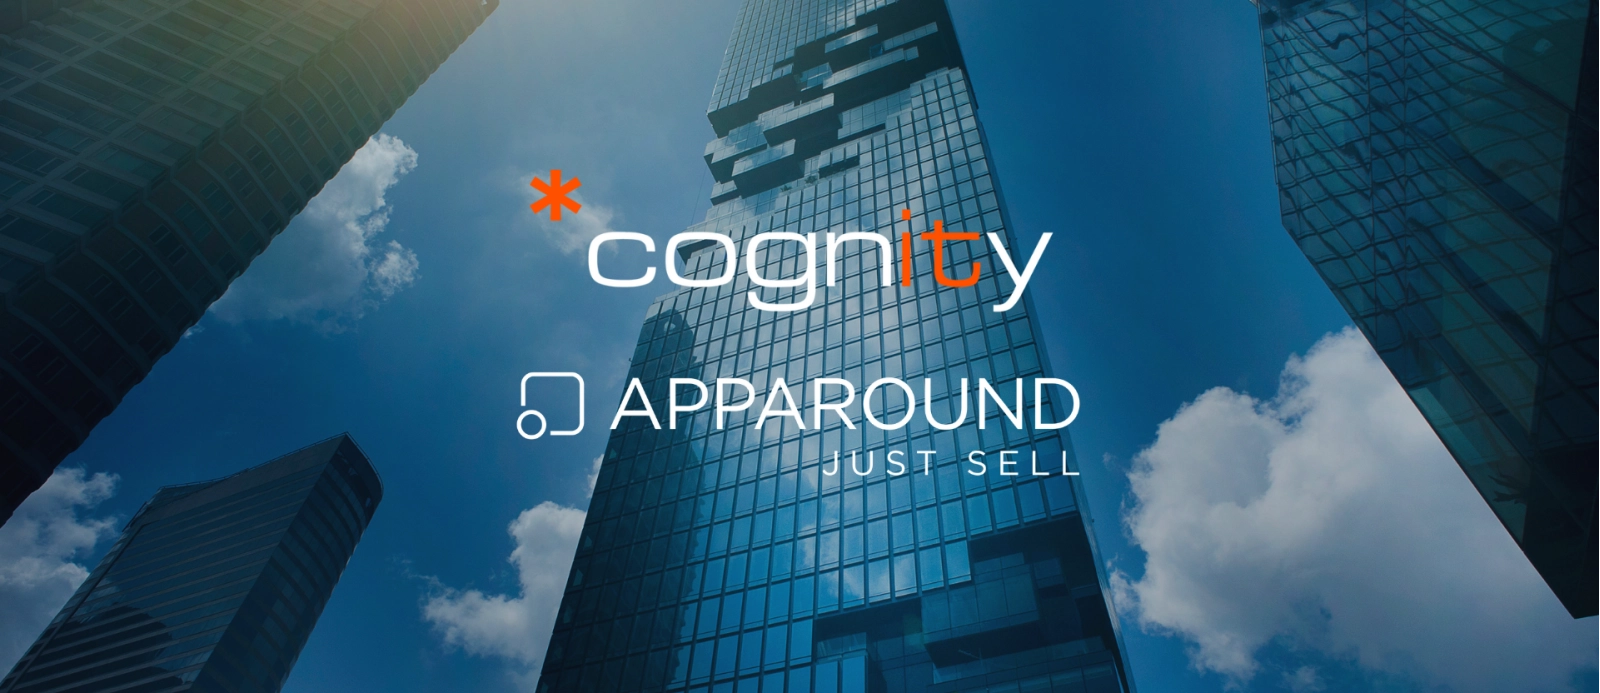 New technology partnership: Apparound and Cognity join forces